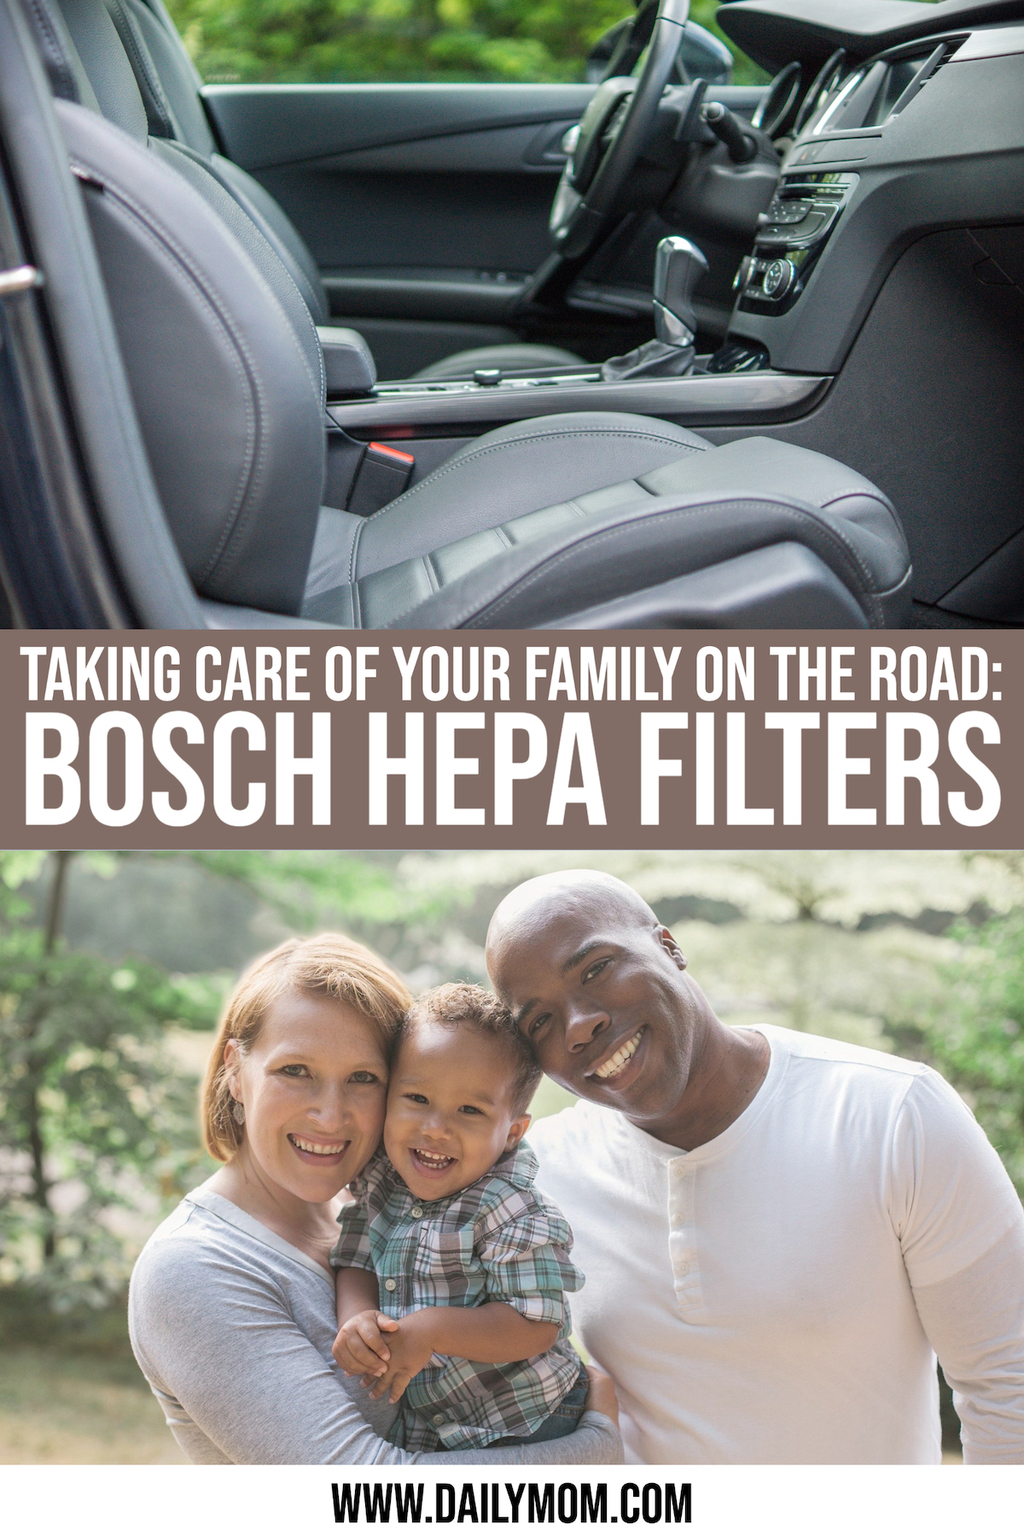 Protect Your Family’s Health With Cabin Air Filters In Cars: With 1 Simple Switch